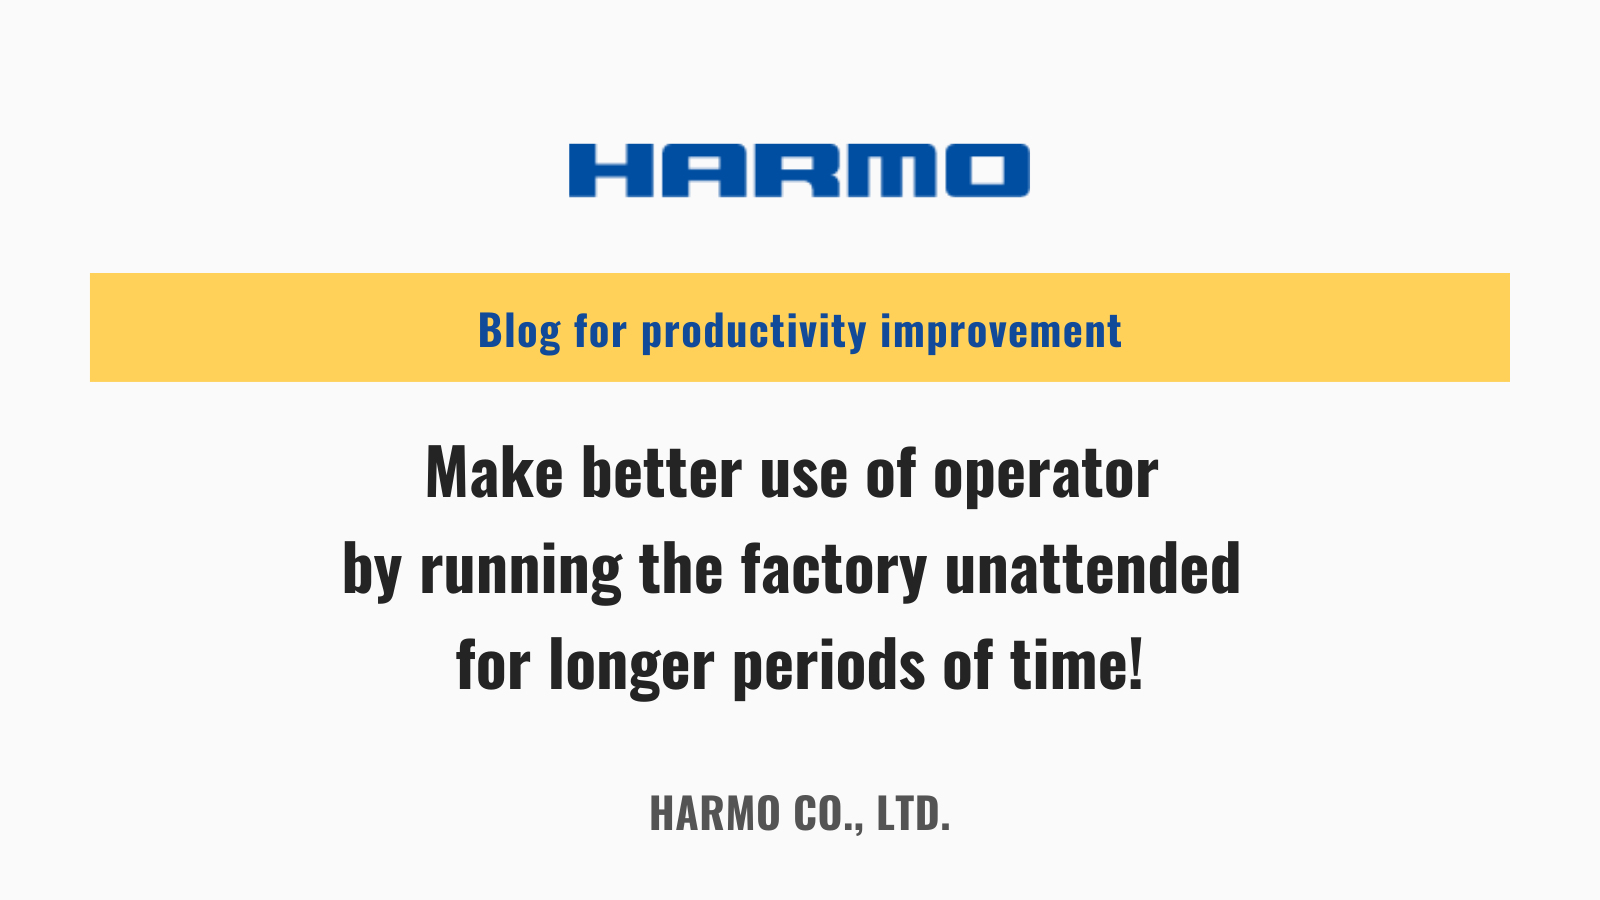 Make better use of operator by running the factory unattended for longer periods of time